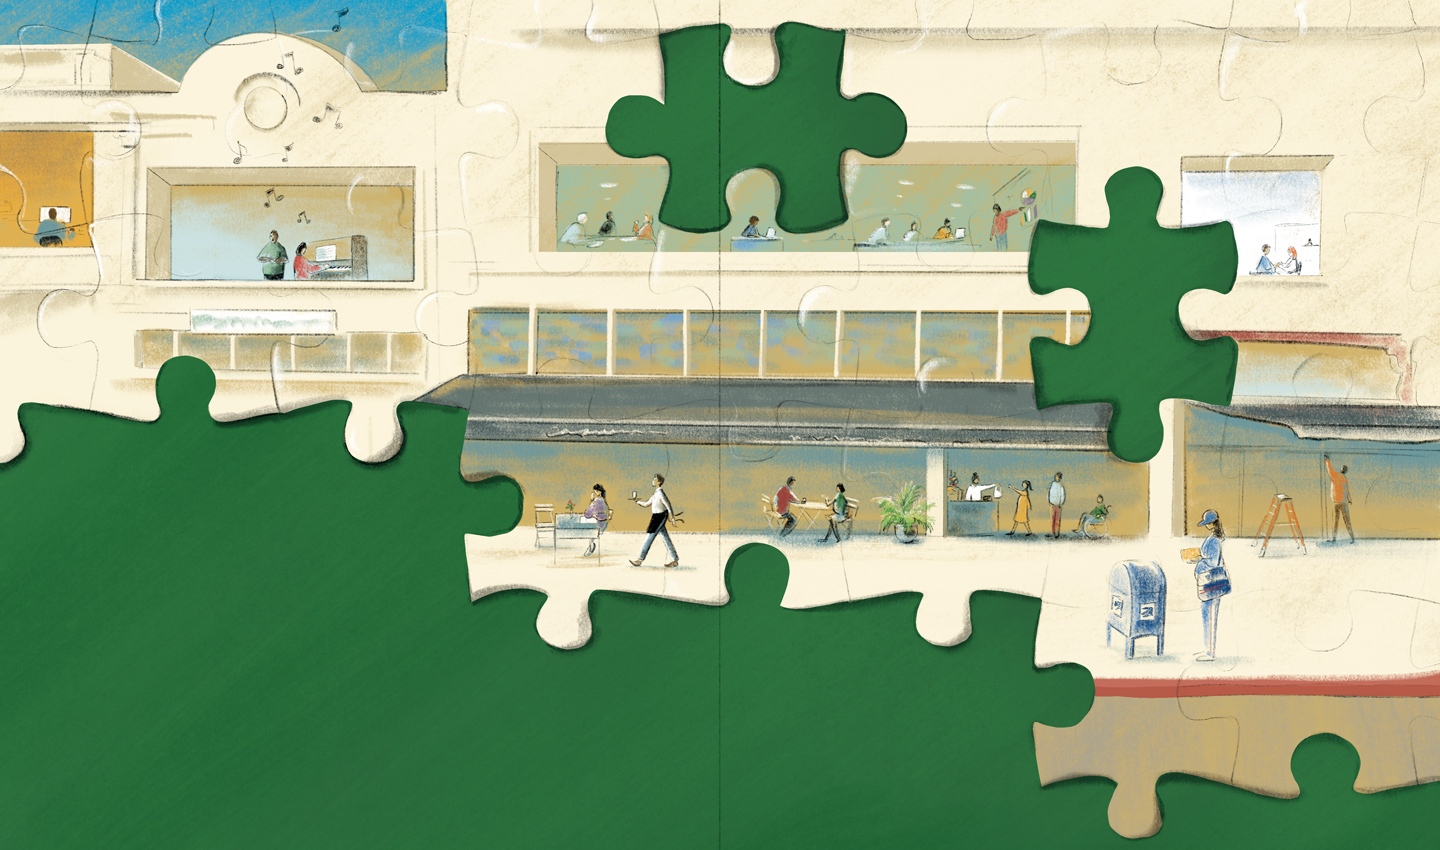 Puzzle pieces form an image of people in a workplace.